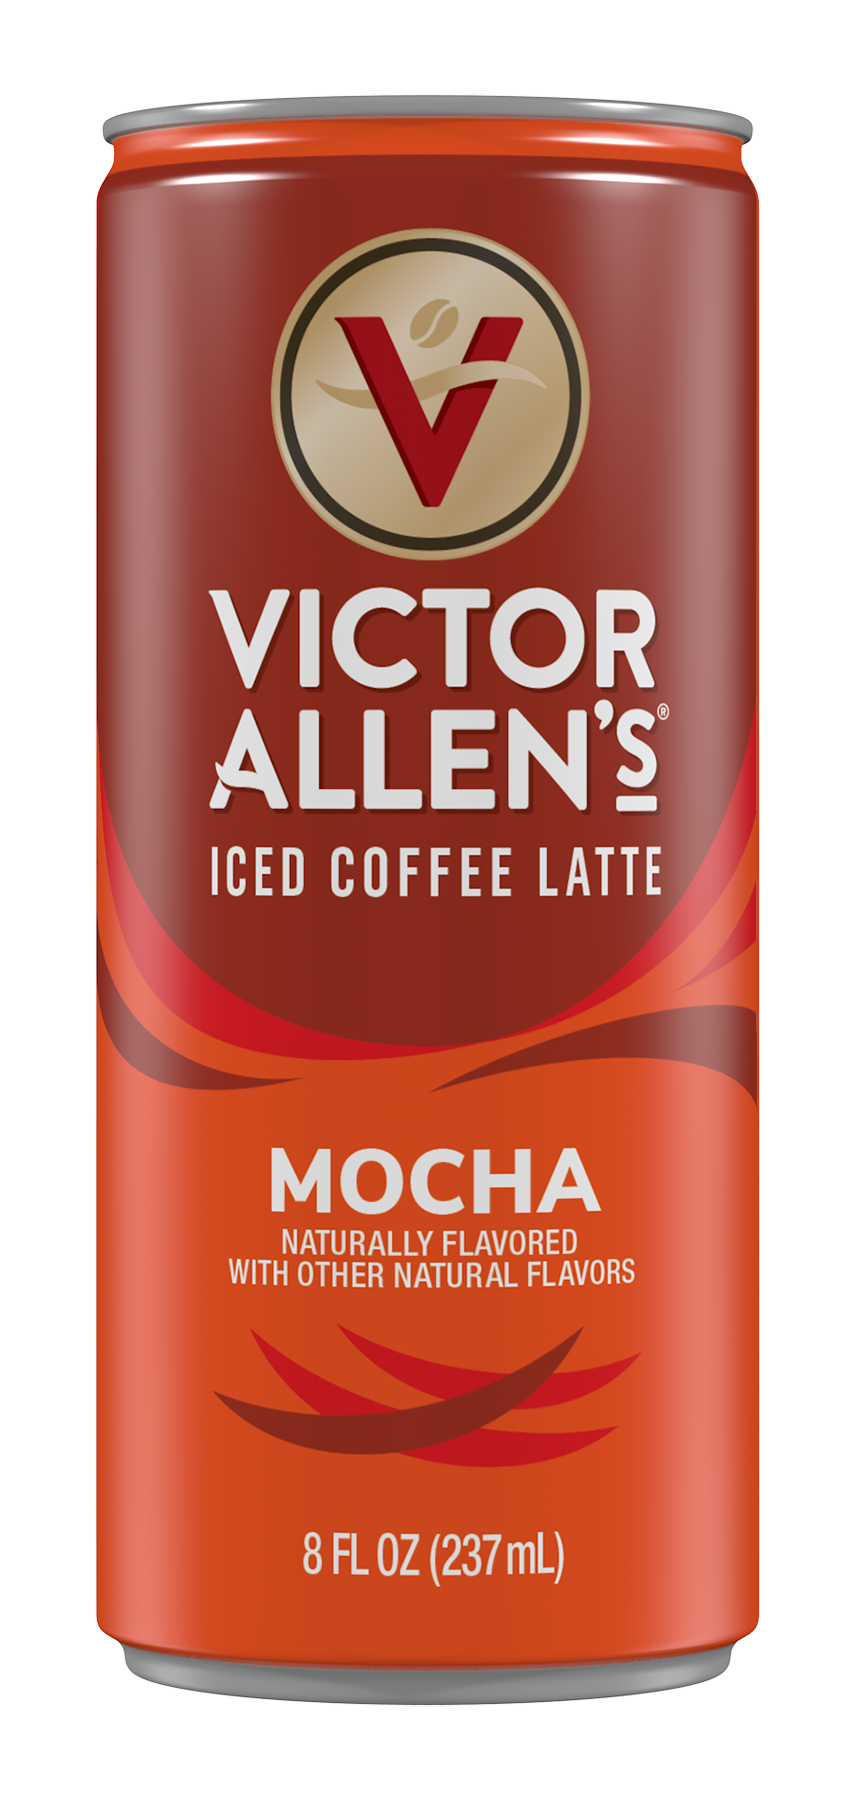 Iced Latte, Mocha Flavored, Ready to Drink, 12 Pack - 8oz Cans